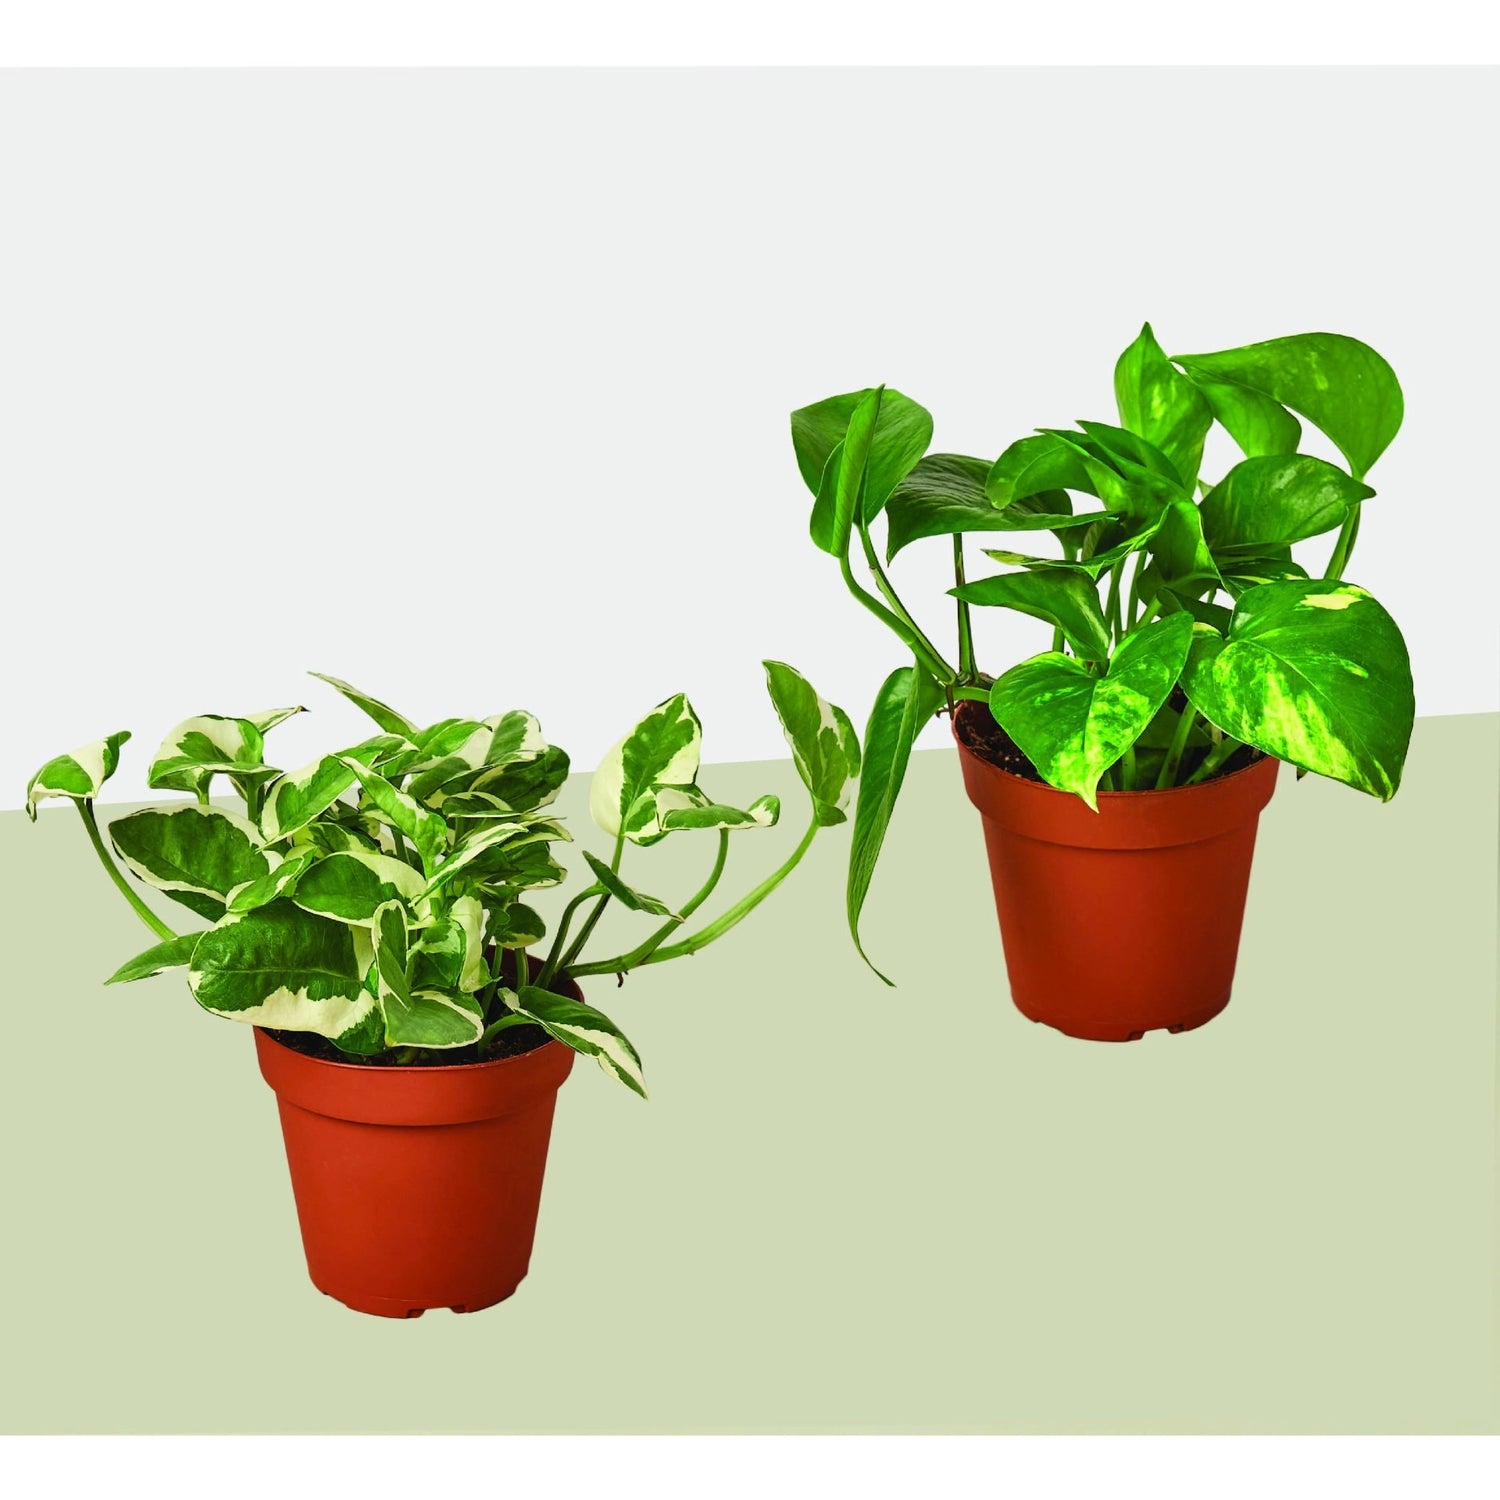 2 Pothos Variety Pack / 4&quot; Pot / Live Plant / Home and Garden Plants - Ethereal Company